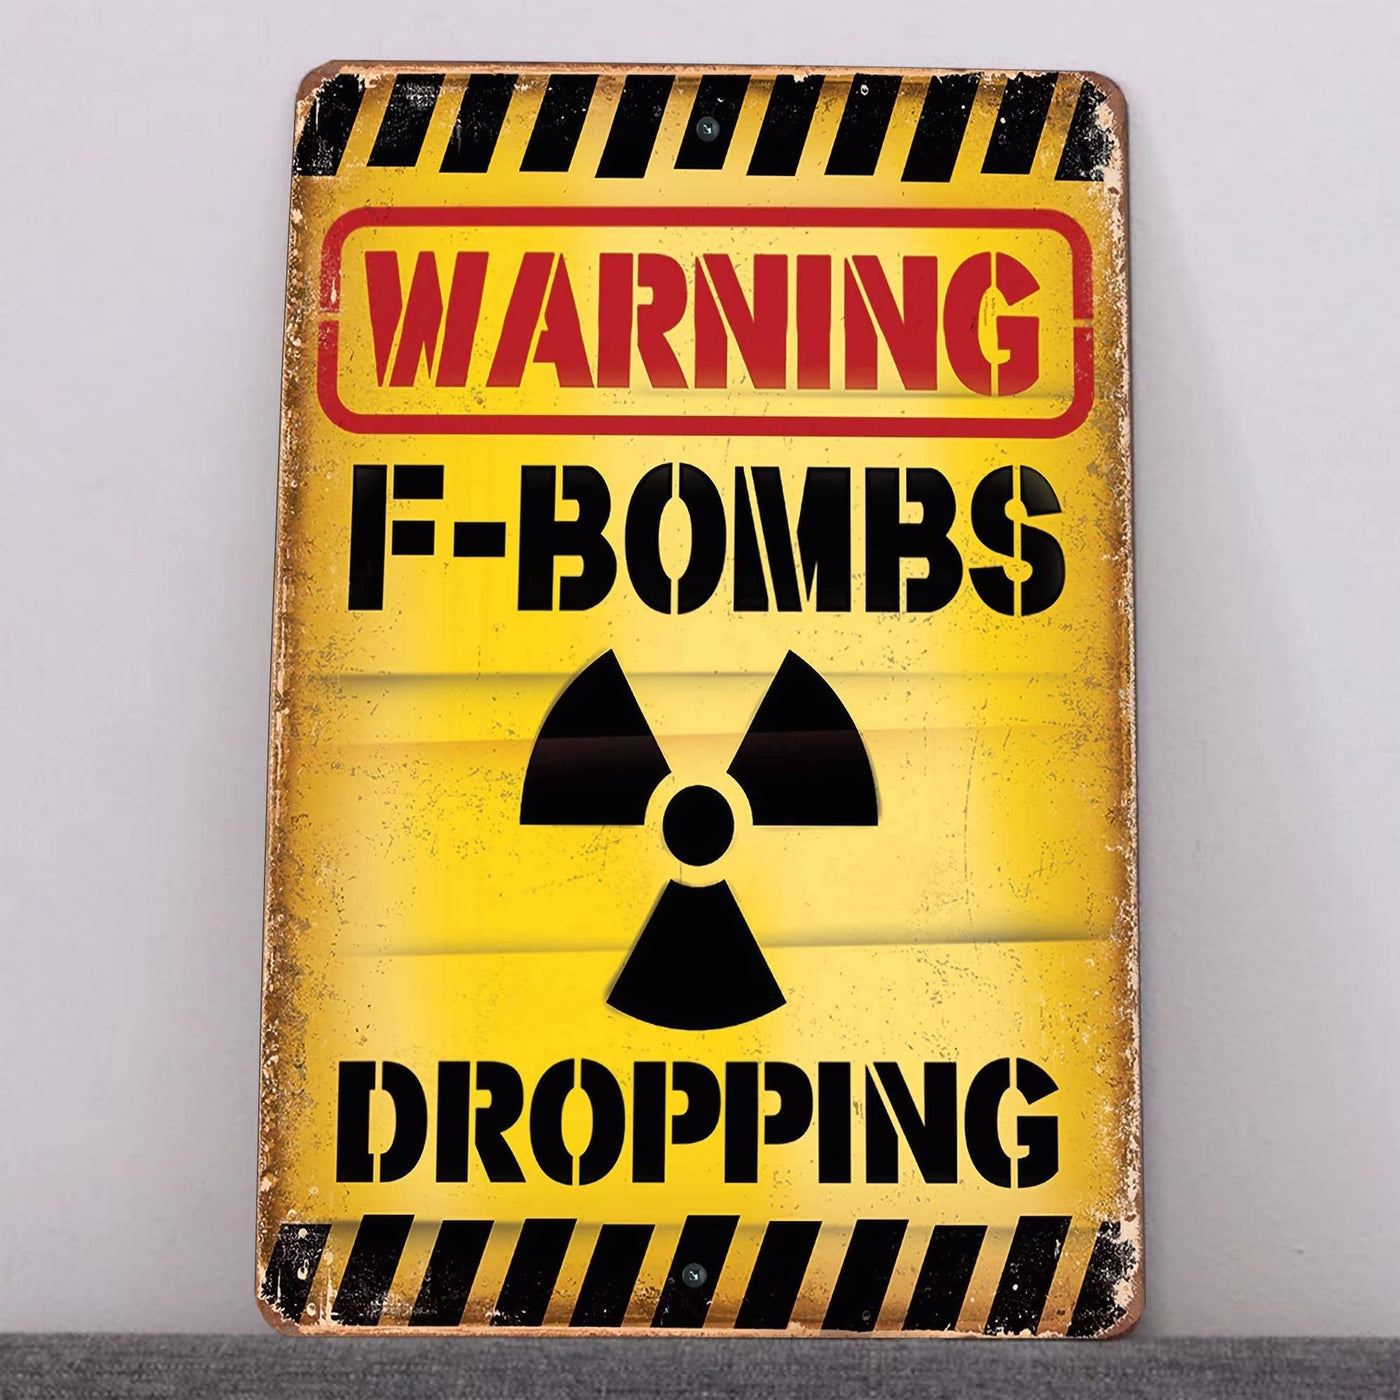 Warning - F Bombs Dropping Metal Signs Vintage Wall Art -8 x 12" Funny Rustic Sign for Bar-Man Cave-Garage-Shop -Retro Tin Military Sign- Home-Office Accessories- Decor. Great Sarcastic Gift!